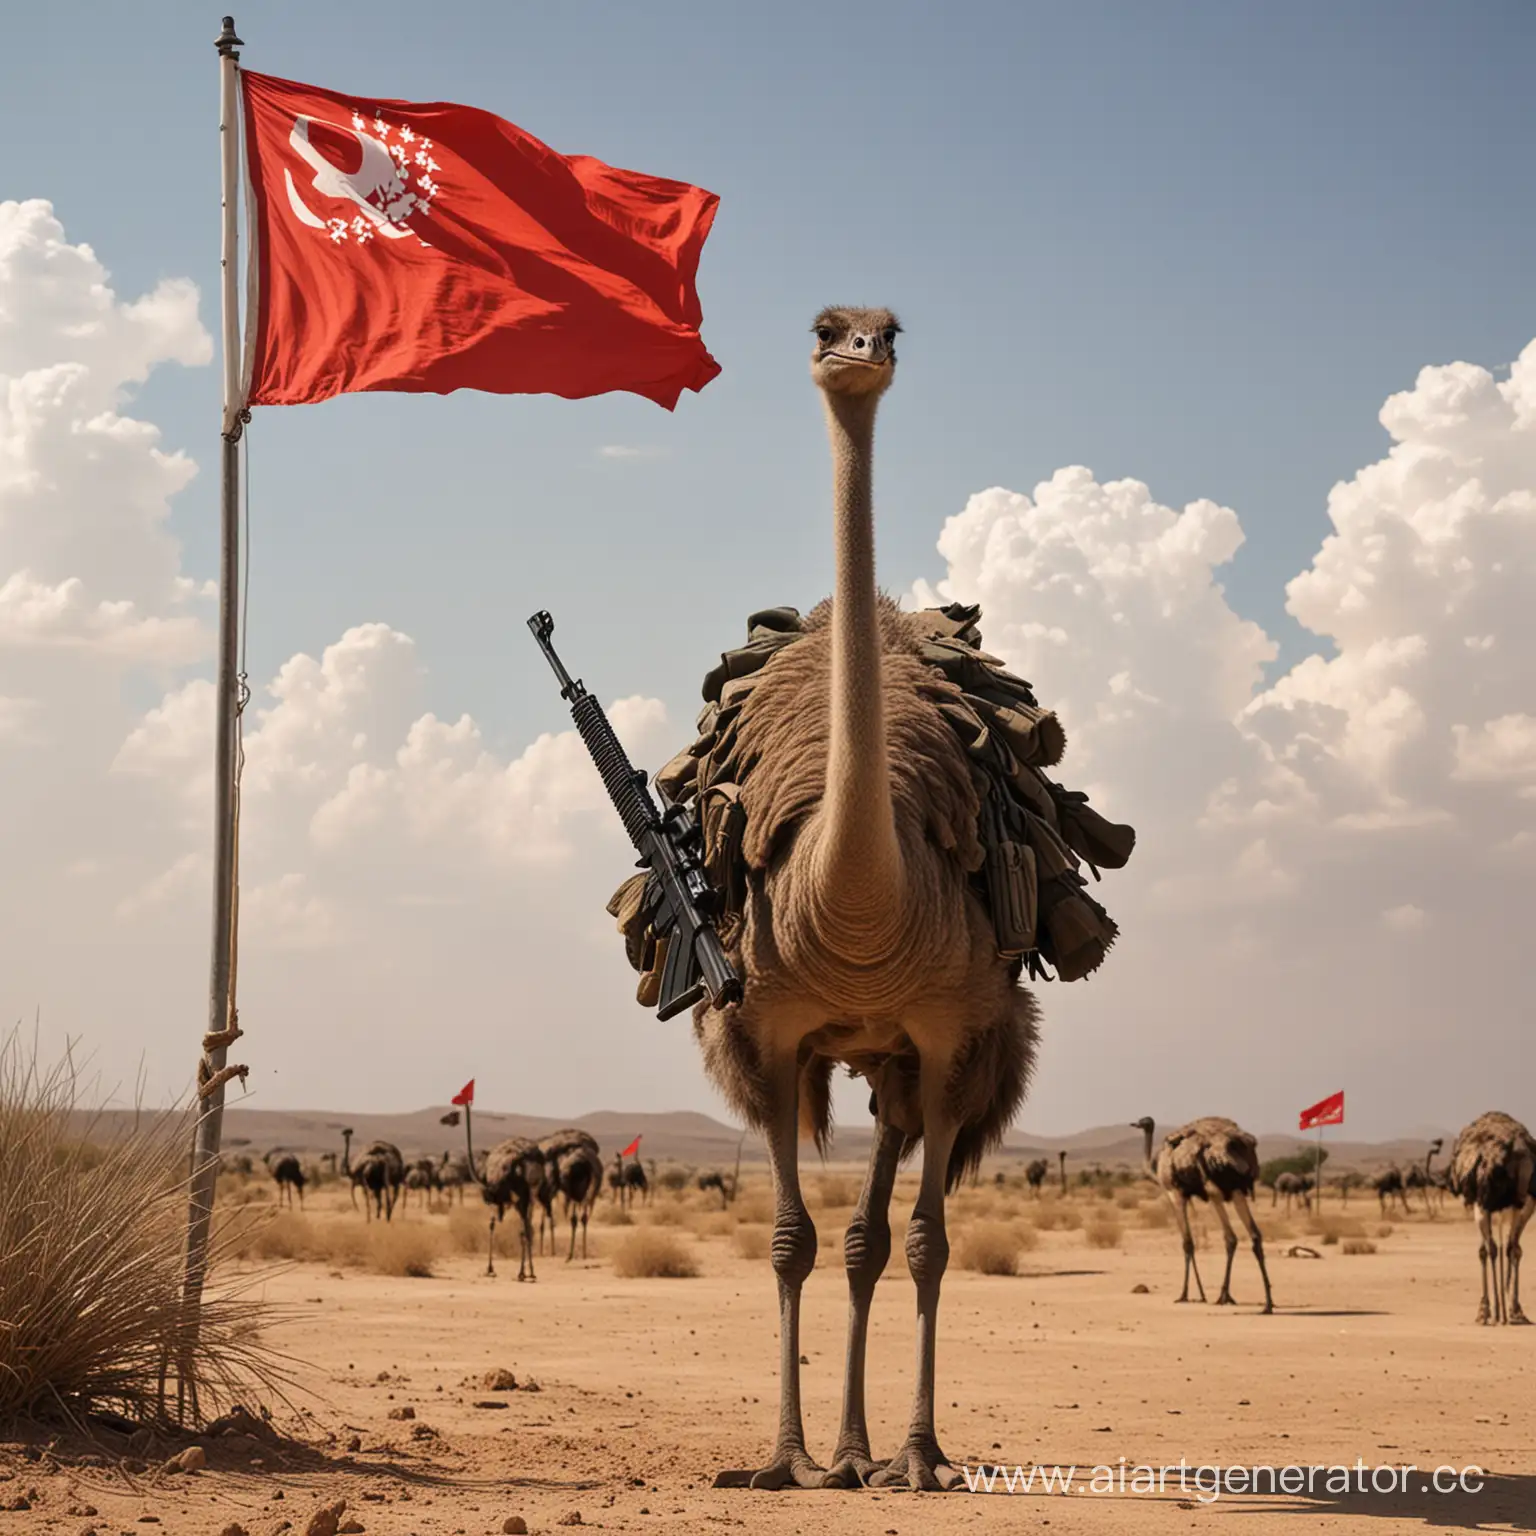 Revolutionary-Ostriches-with-Automatic-Rifles-and-Red-Flag